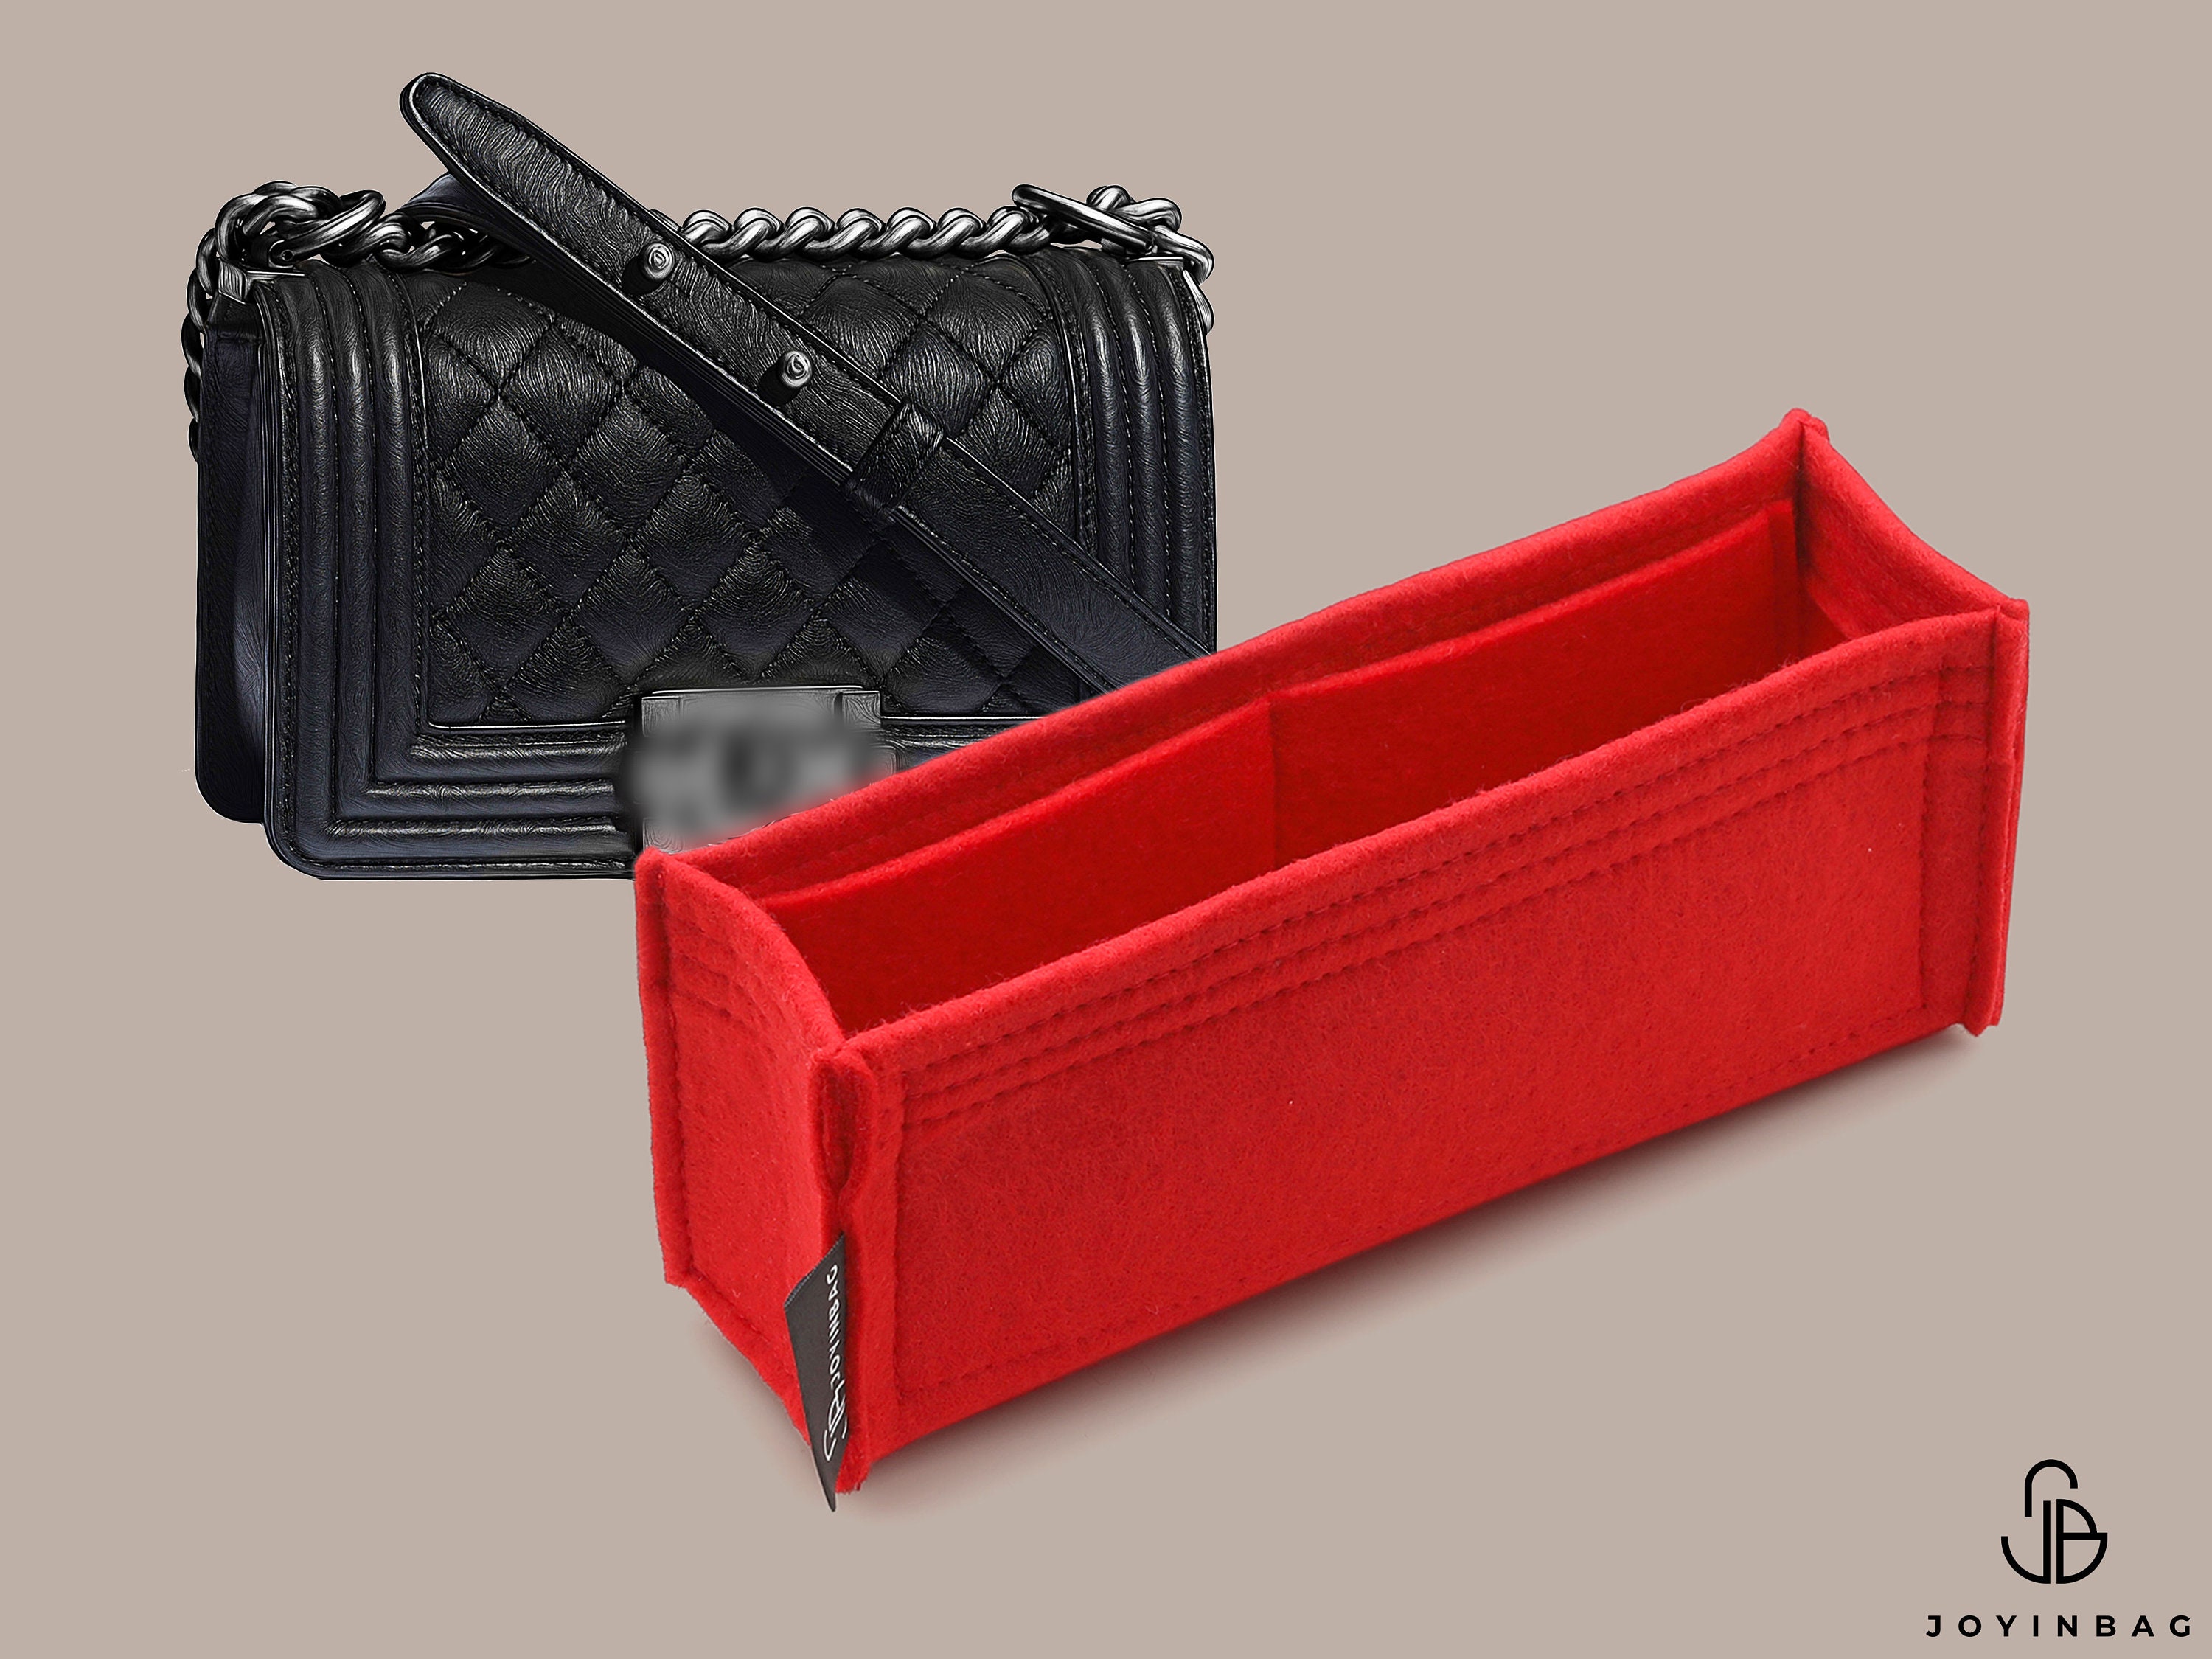 Why Do You Need a Purse Insert Organizer for Your Luxury Bag?